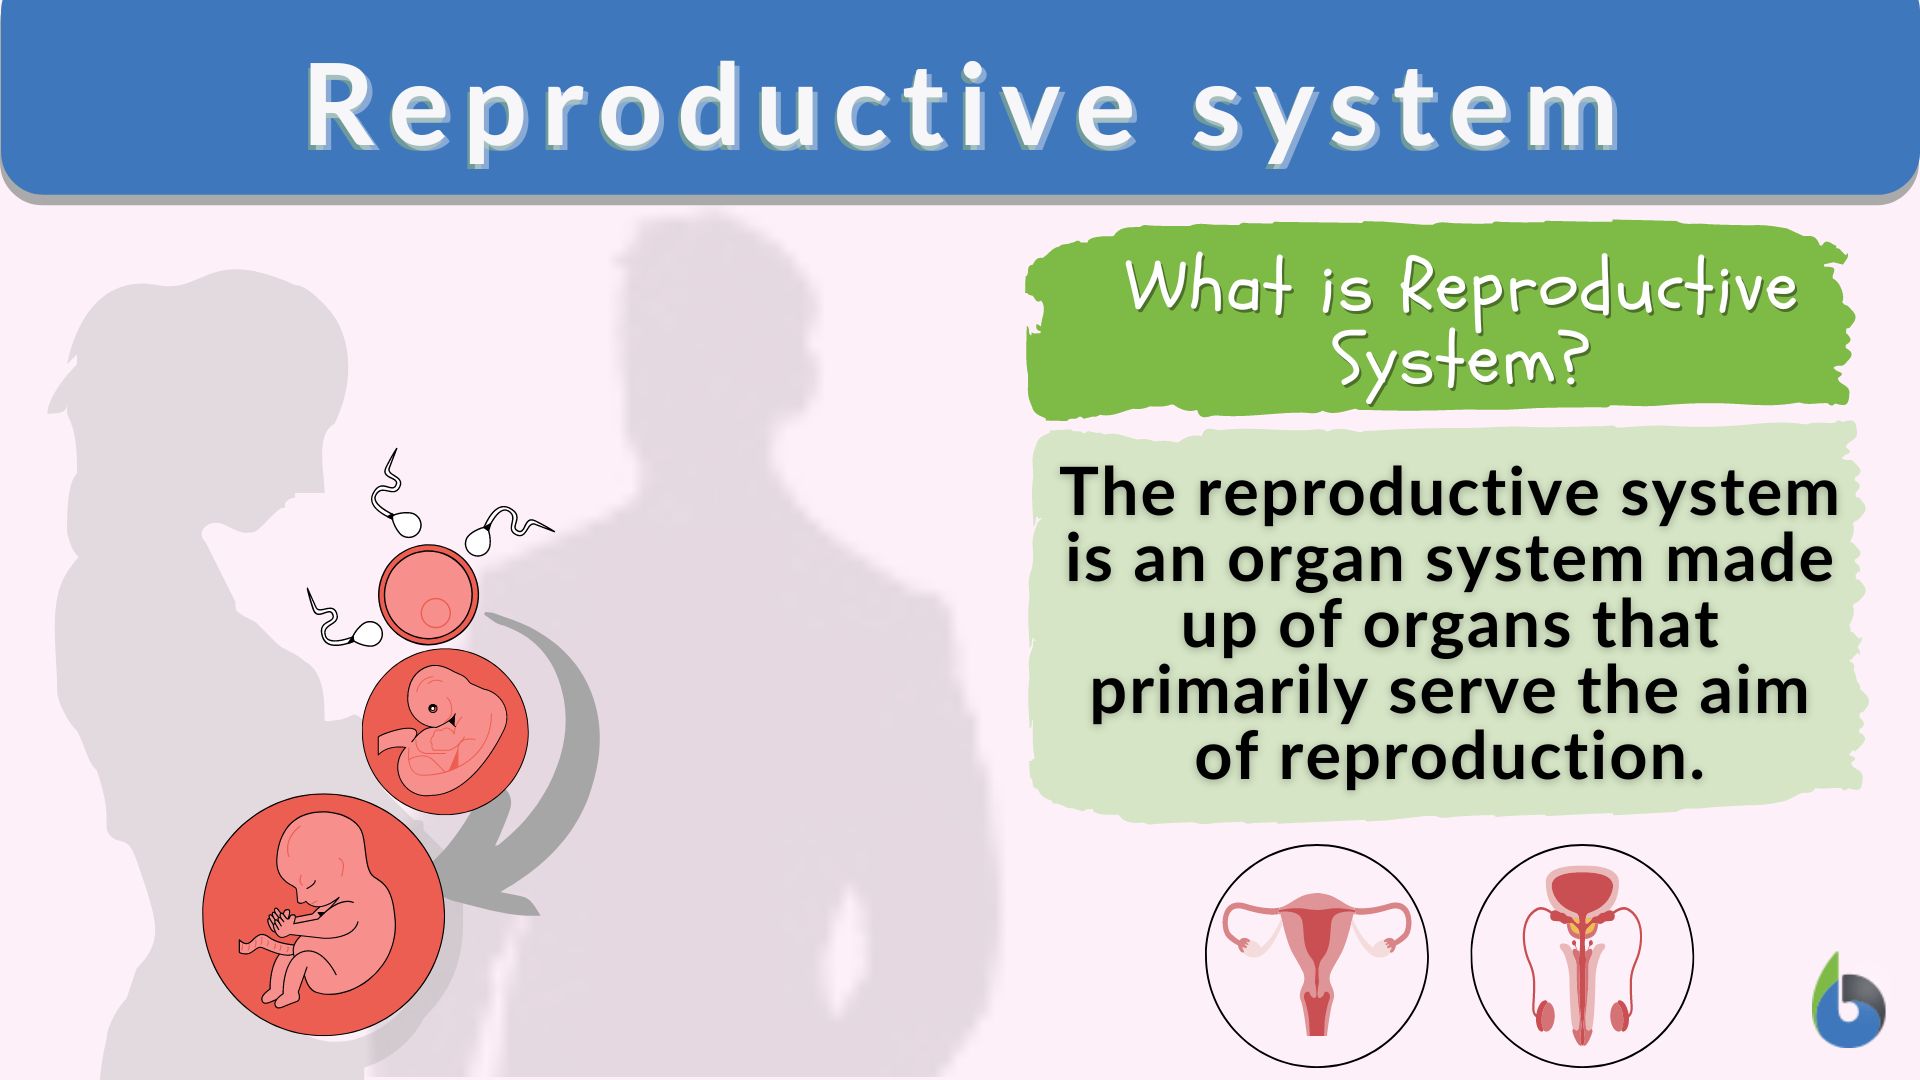 Human reproductive system, Definition, Diagram & Facts